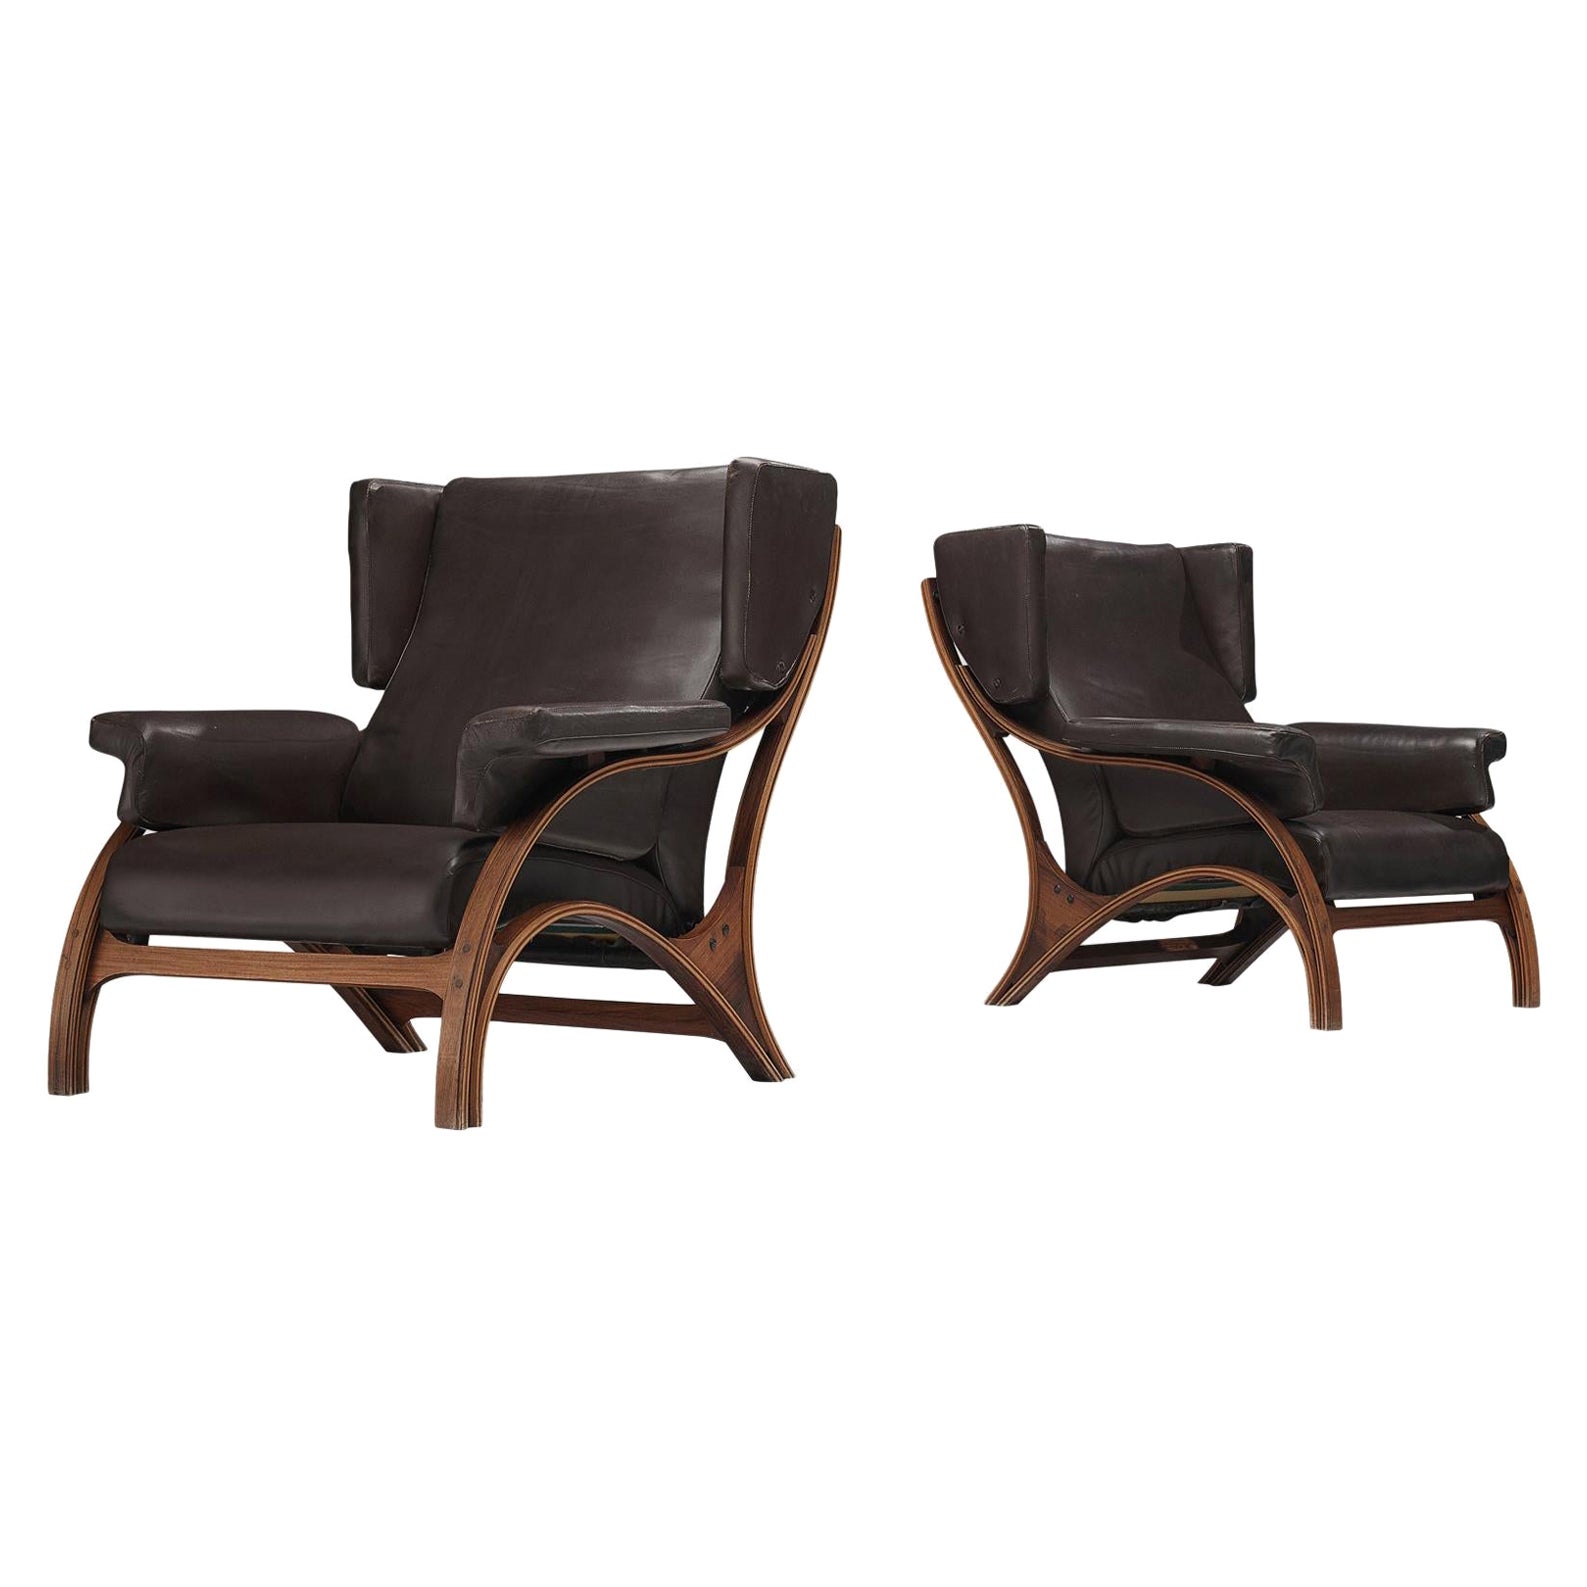 Giampiero Vitelli Pair of Wingback Chairs in Brown Leather